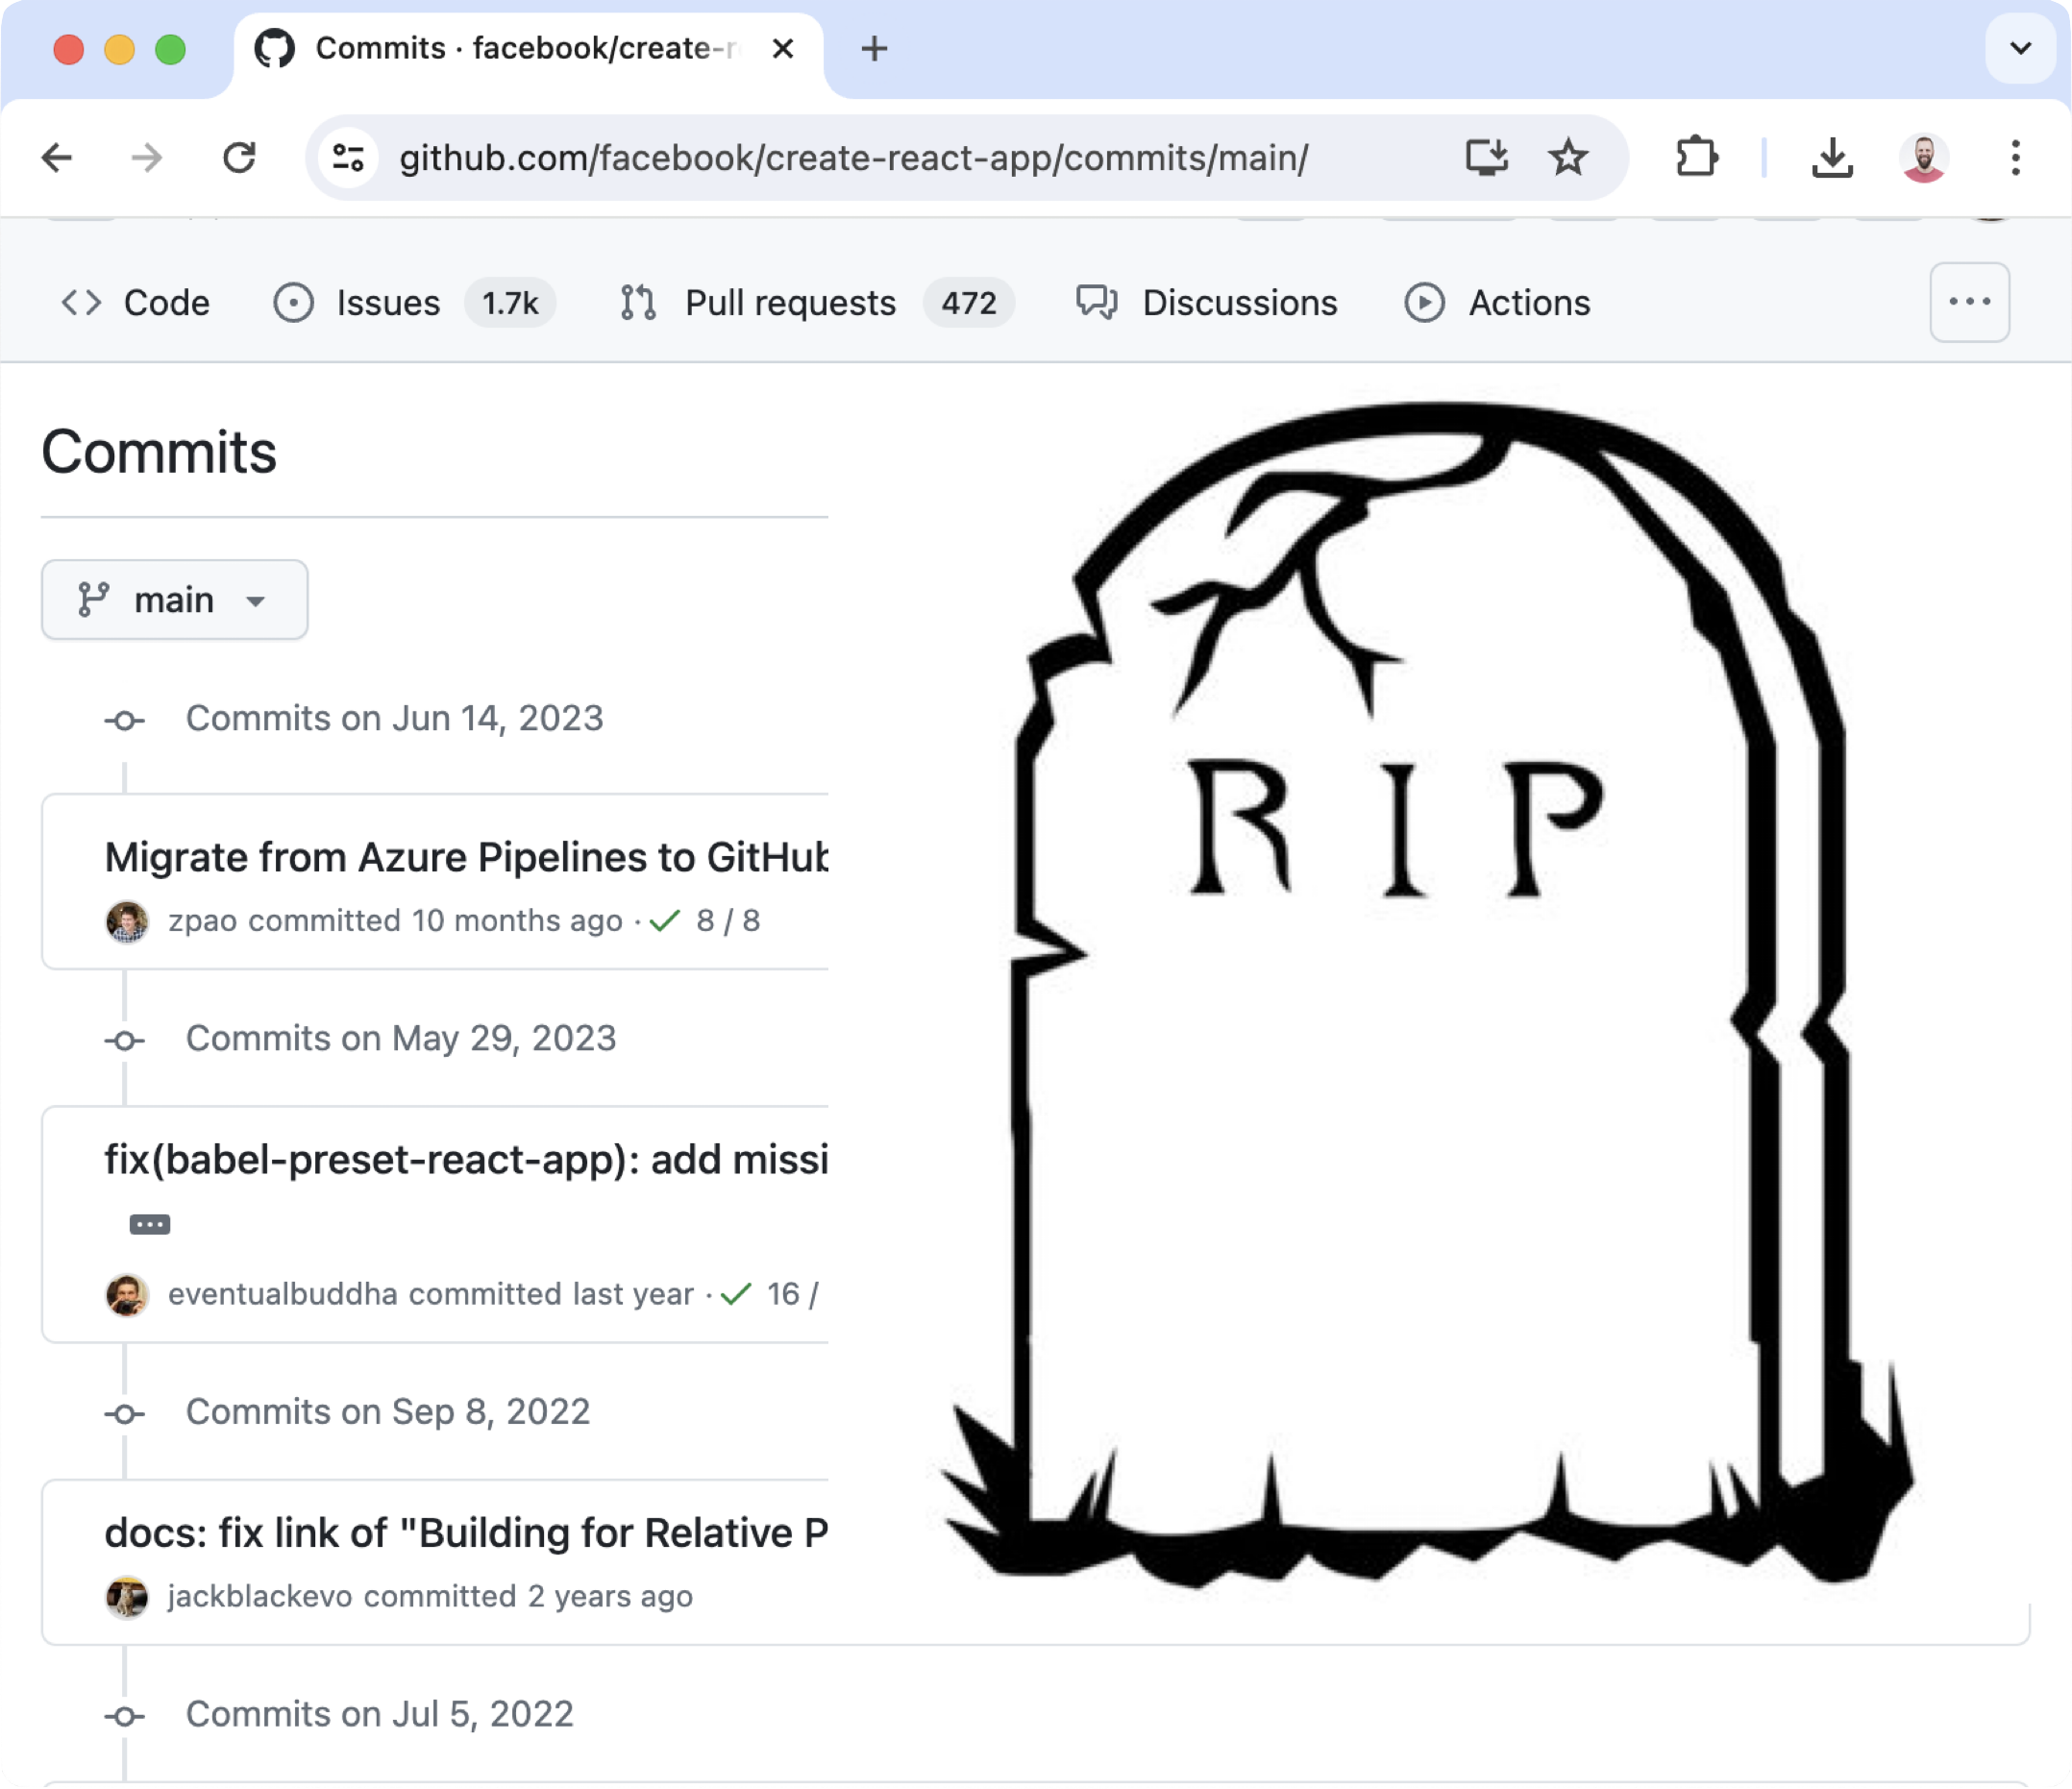 Create React App GitHub showing the last 3 commits from June 14, 2023, May 29, 2023, and Sep 8, 2022. There is a cartoon tombstone to the right with RIP engraved on it